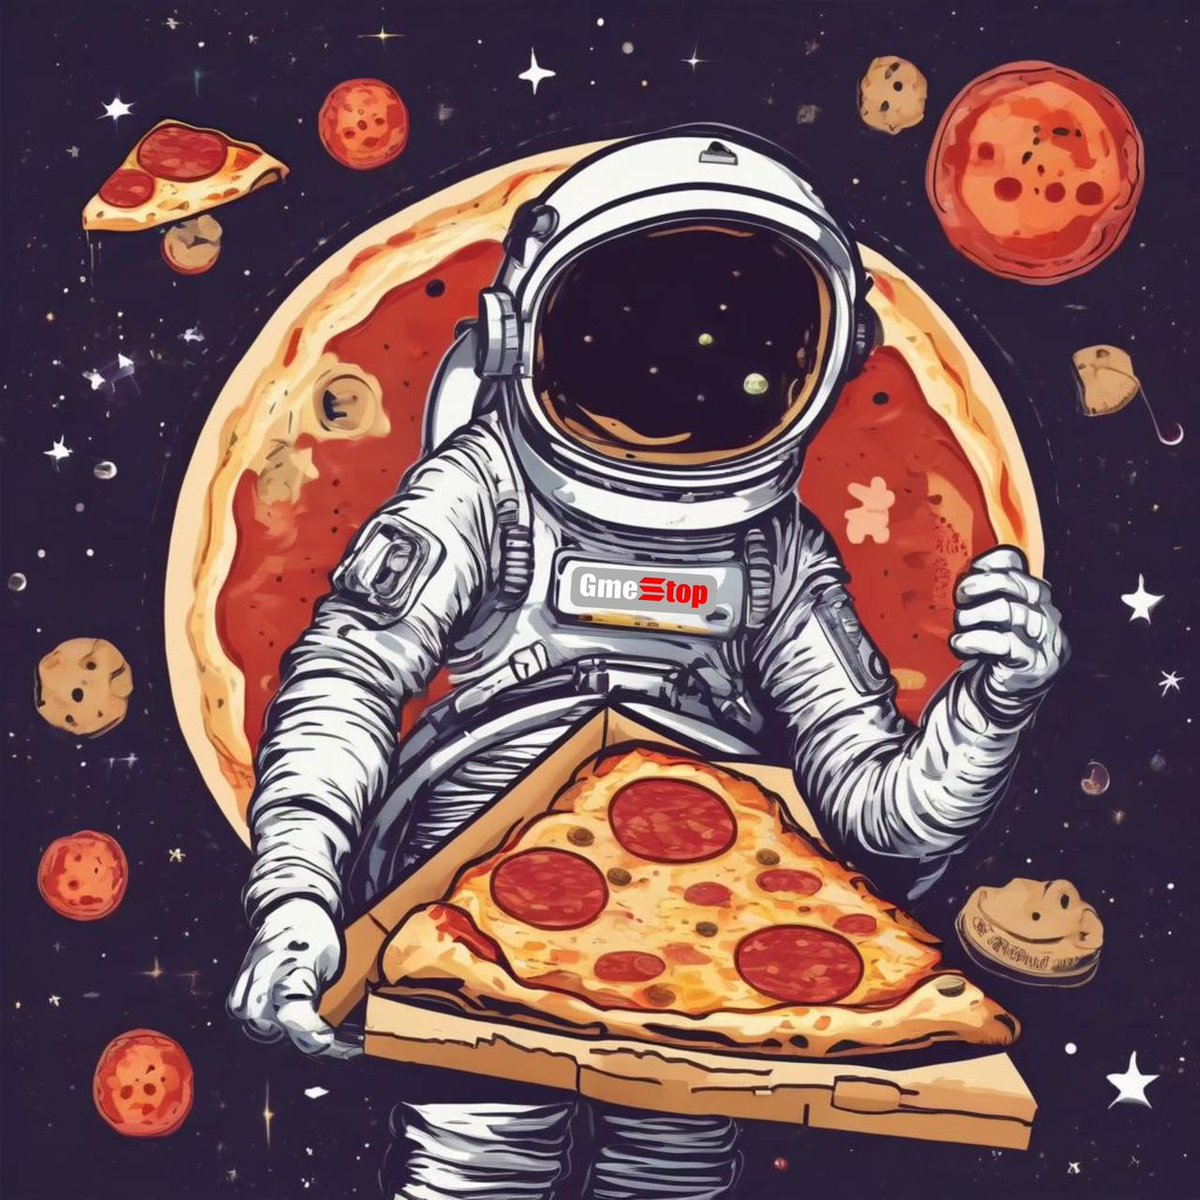 🍕Celebrating #Bitcoin Pizza Day with a $GME PIZZA GIVEAWAY!🍕 PRICE: 5 WINNERS WILL WIN $25 of $GME each! 1. Quote Tweet this giveaway and include: -Rules: 1) Like & Retweet 🔃 2) Follow @gmecoinsol 3) Comment “GME PIZZA” 2. Giveaway ends in 48 hours, good luck! Good